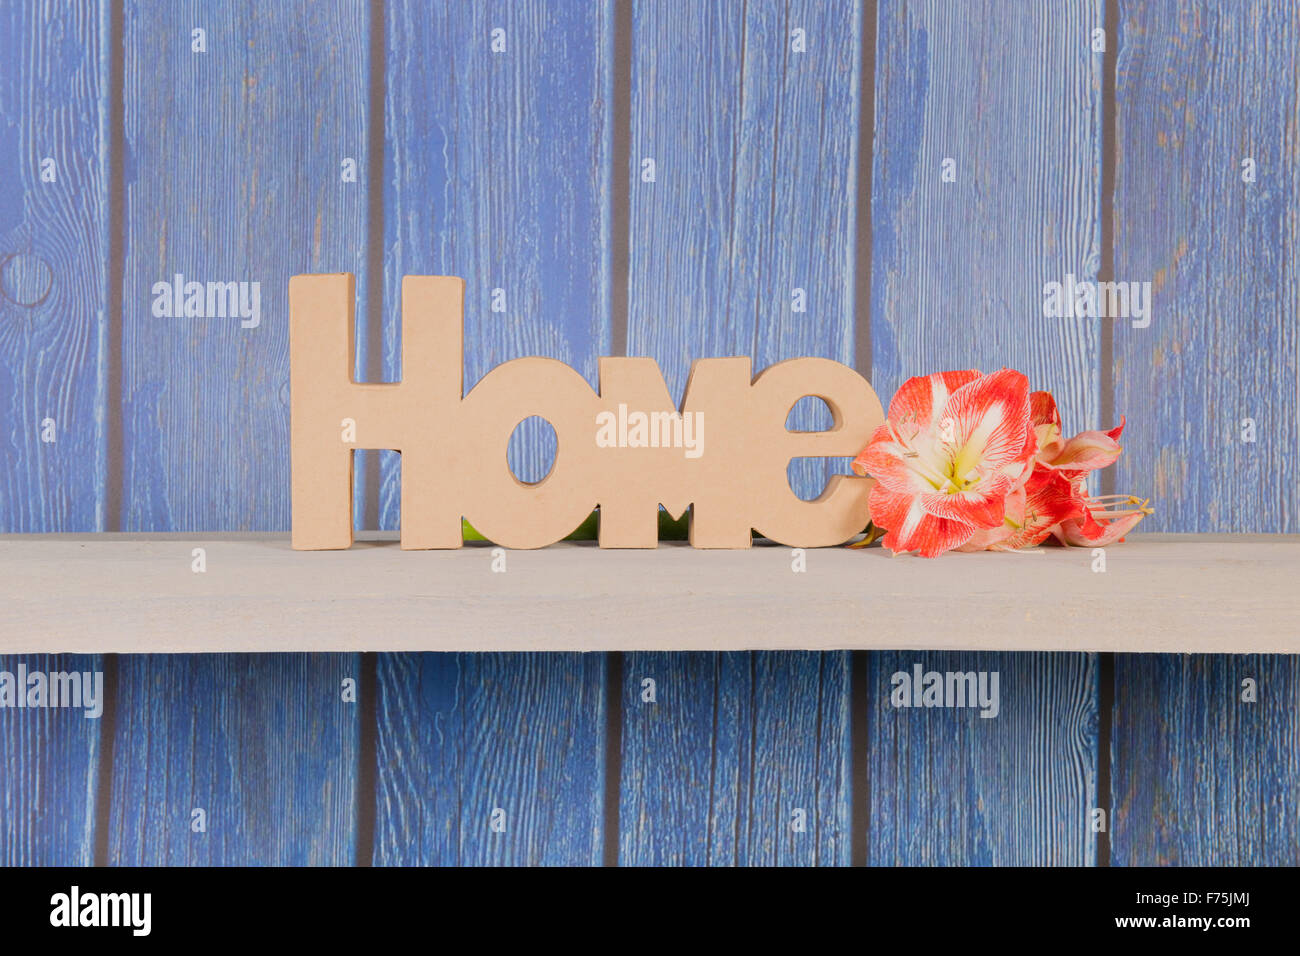 Word home with Amaryllis flowers on blue background Stock Photo